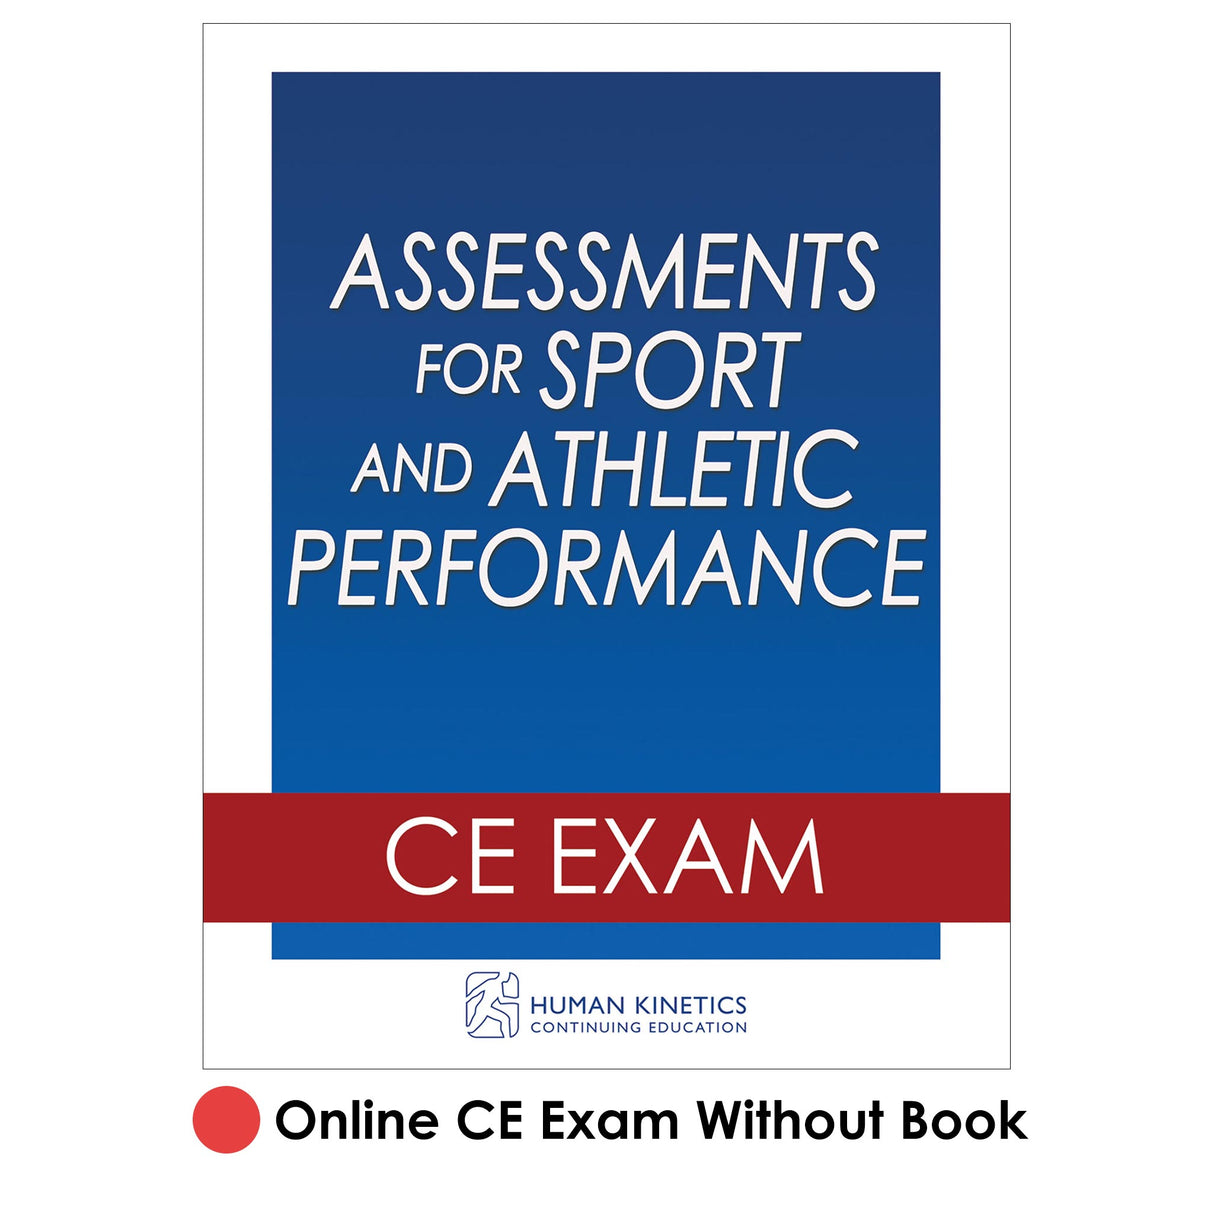 Assessments for Sport and Athletic Performance Online CE Exam Without Book